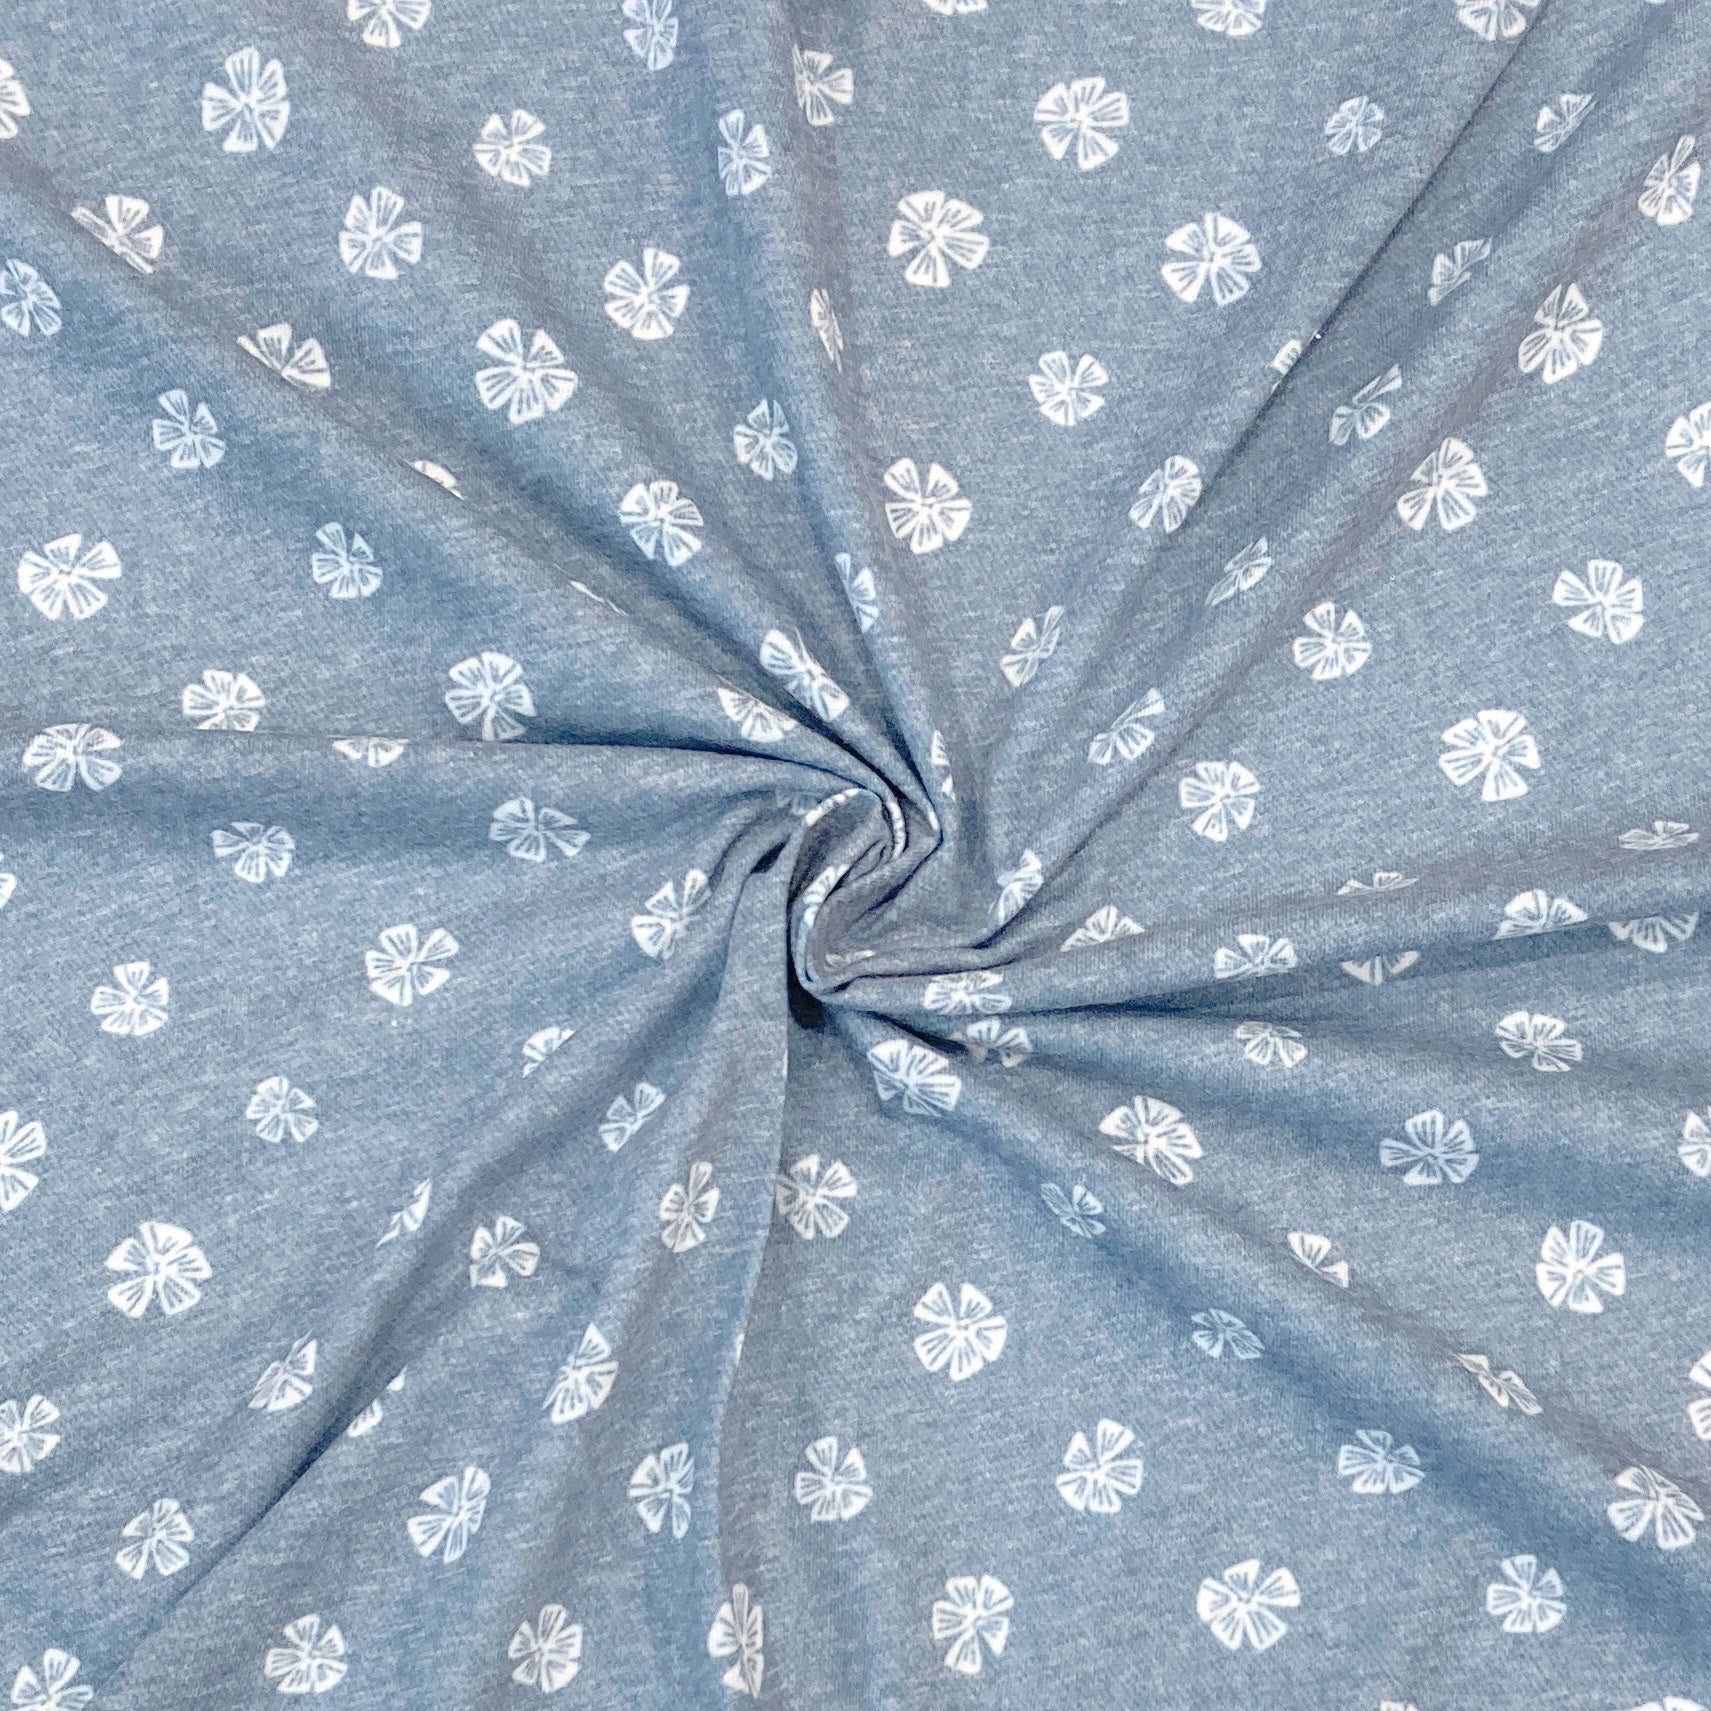 Faux Chambray Blue and White Floral Tri-Blend Jersey Knit Fabric, By Brittney Laidlaw for CLUB Fabrics Fabric, Raspberry Creek Fabrics